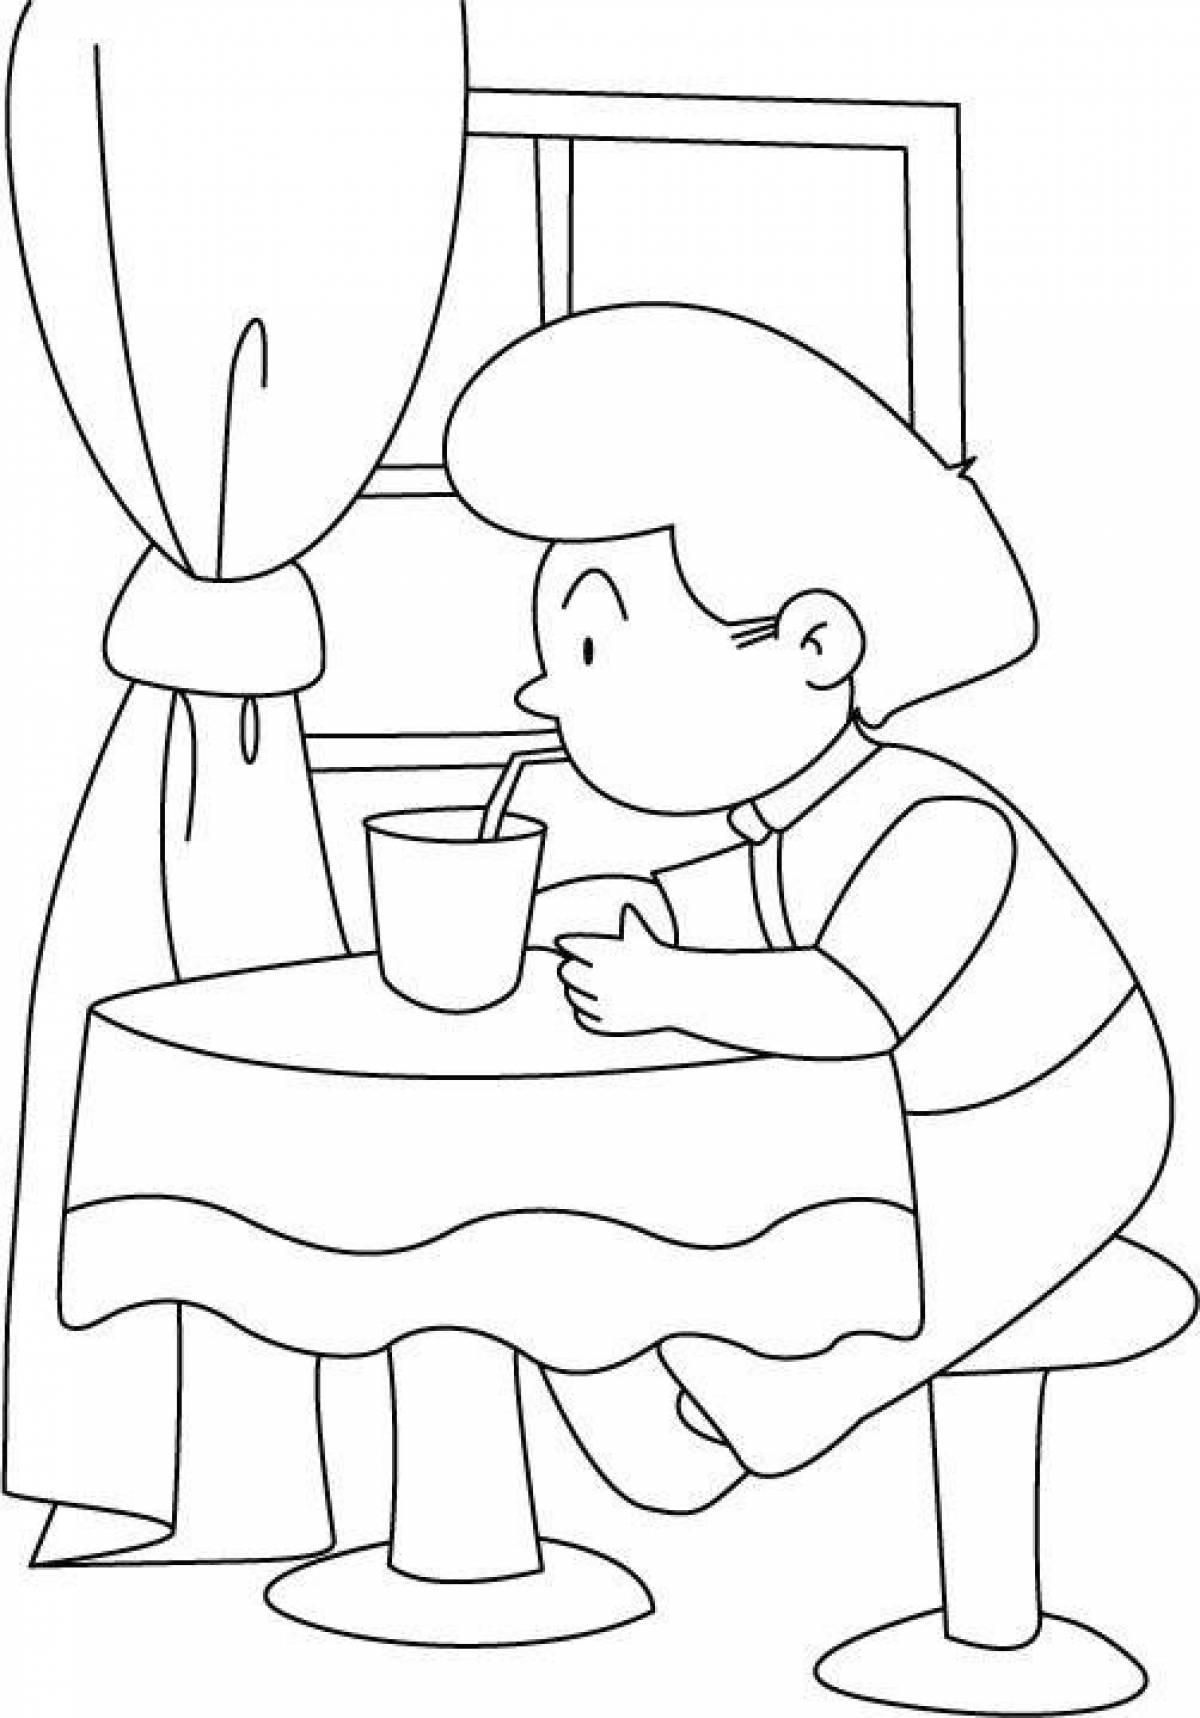 Colorful drink coloring page